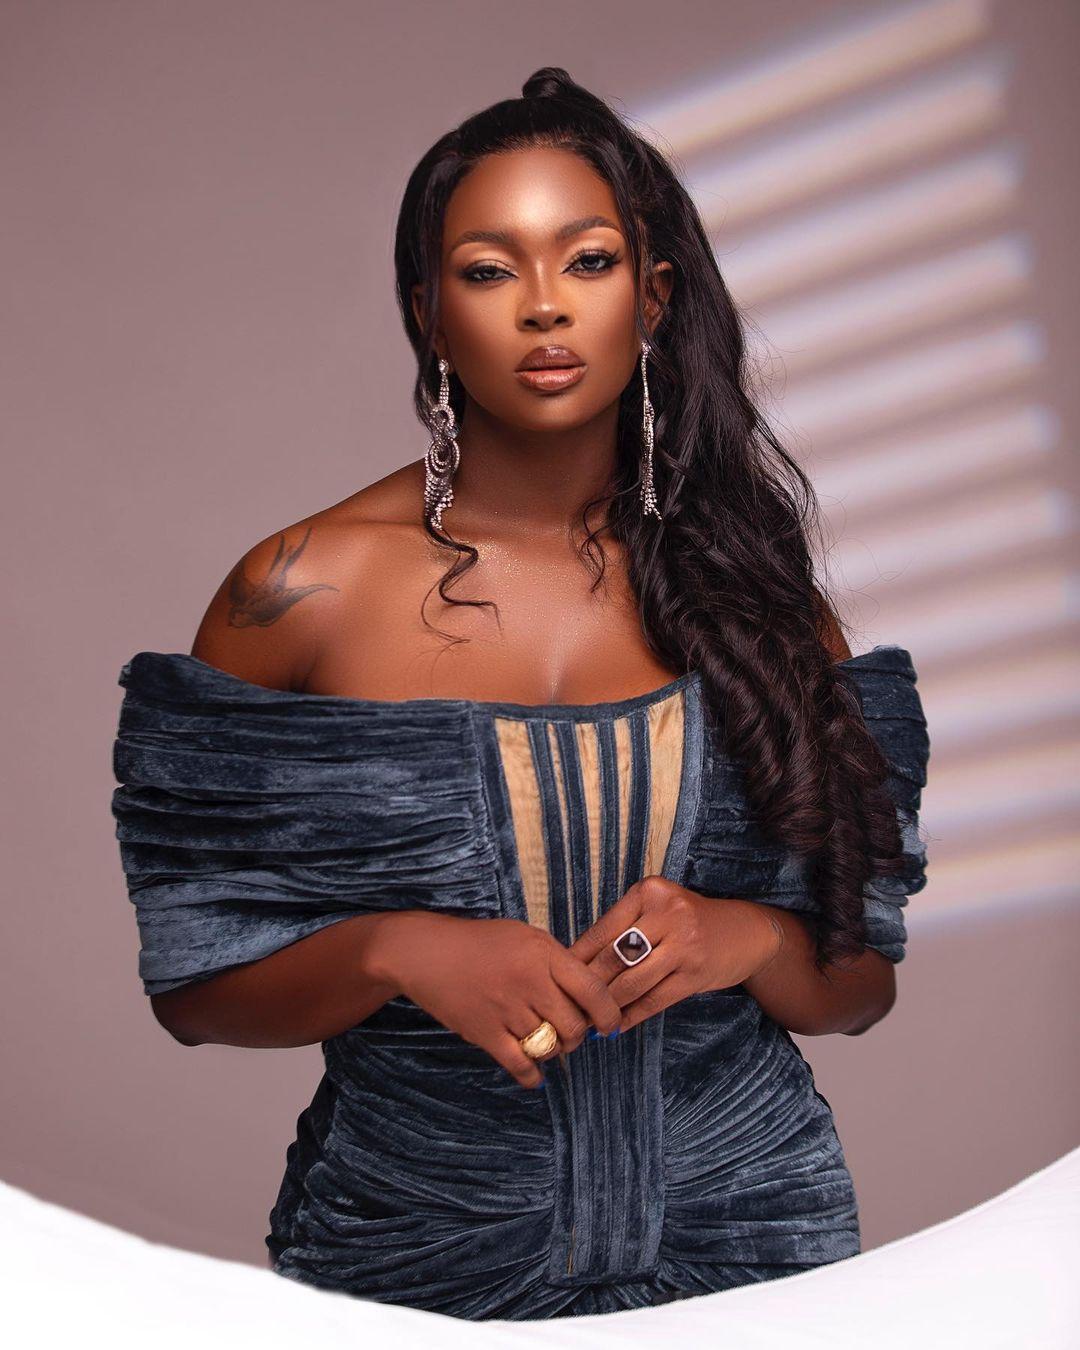 I built two houses at 22years old — BBNaija's Ka3na brags in new post